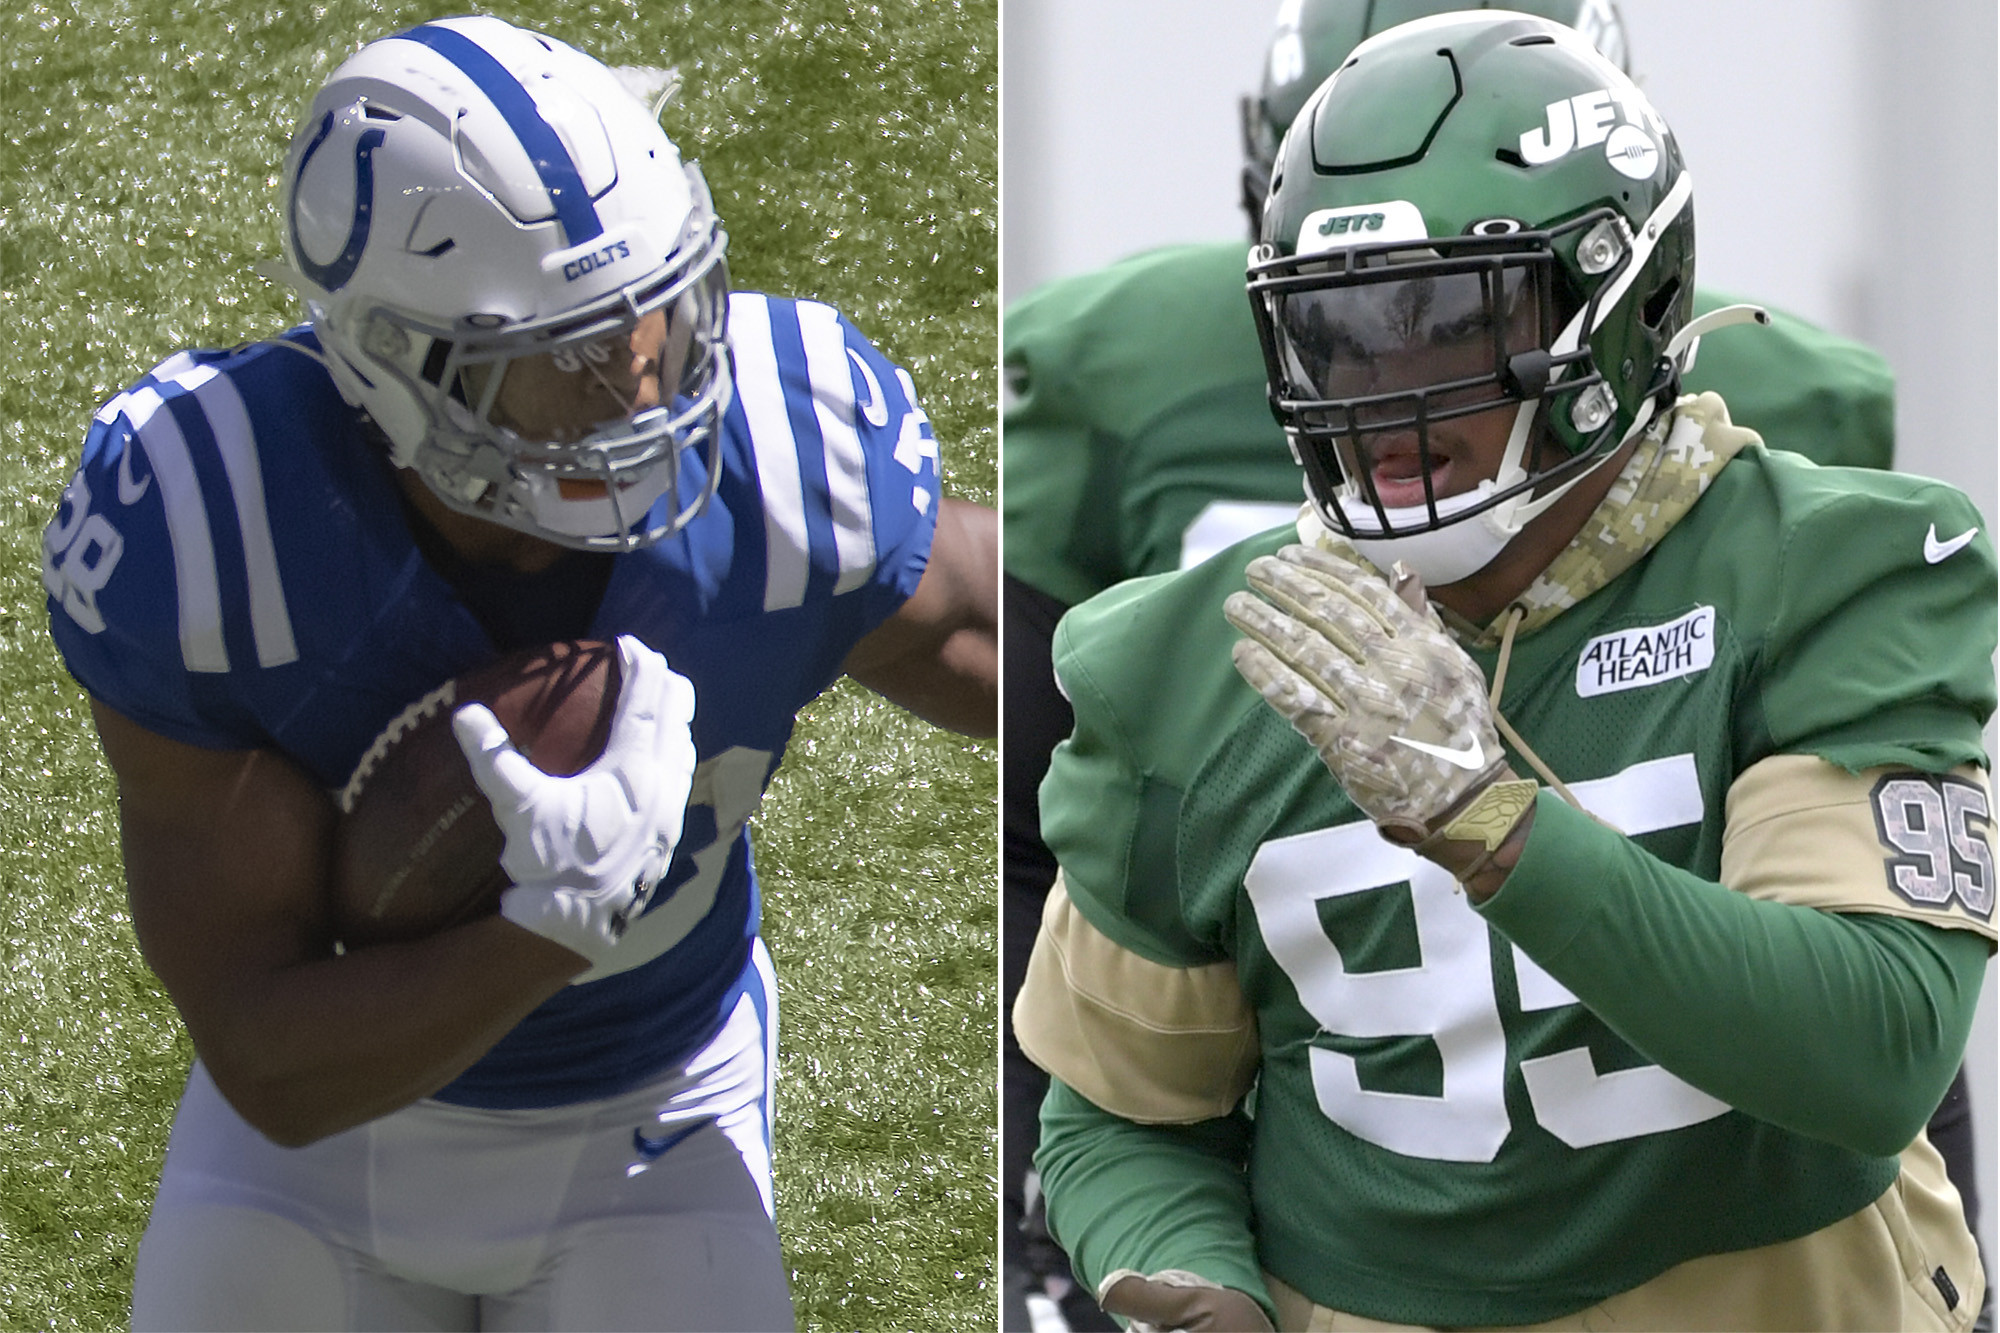 Jets vs. Colts Preview, predictions, what to watch for The State